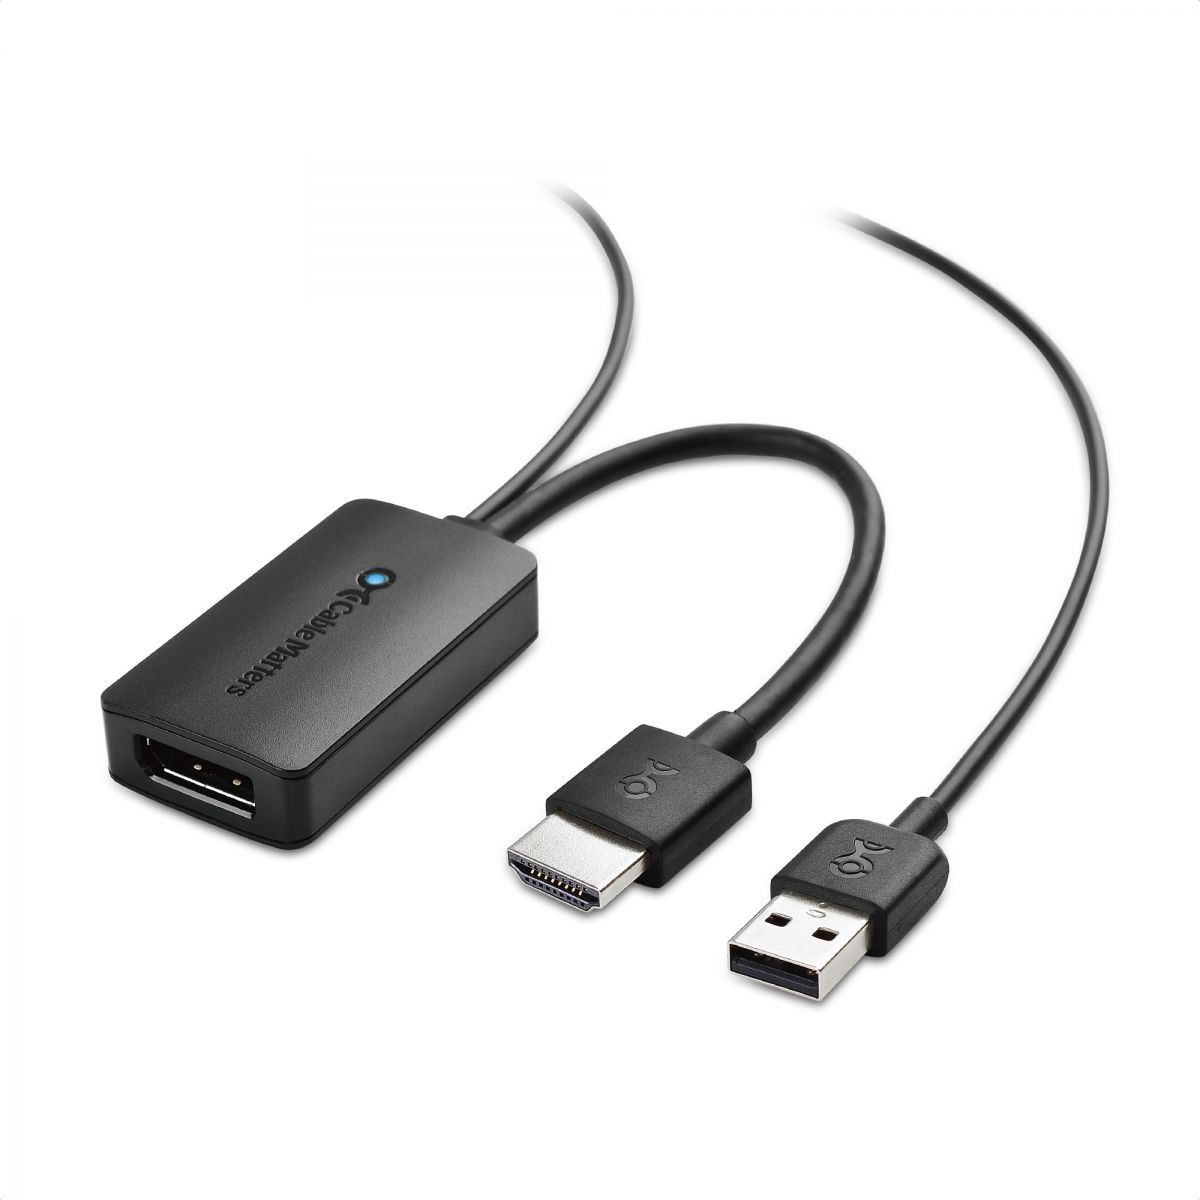 Cable Matters 2-Pack DisplayPort to HDMI Adapter DP to HDMI Adapter is NOT Compatible with USB Ports, Do NOT Order for USB Ports on Computers 